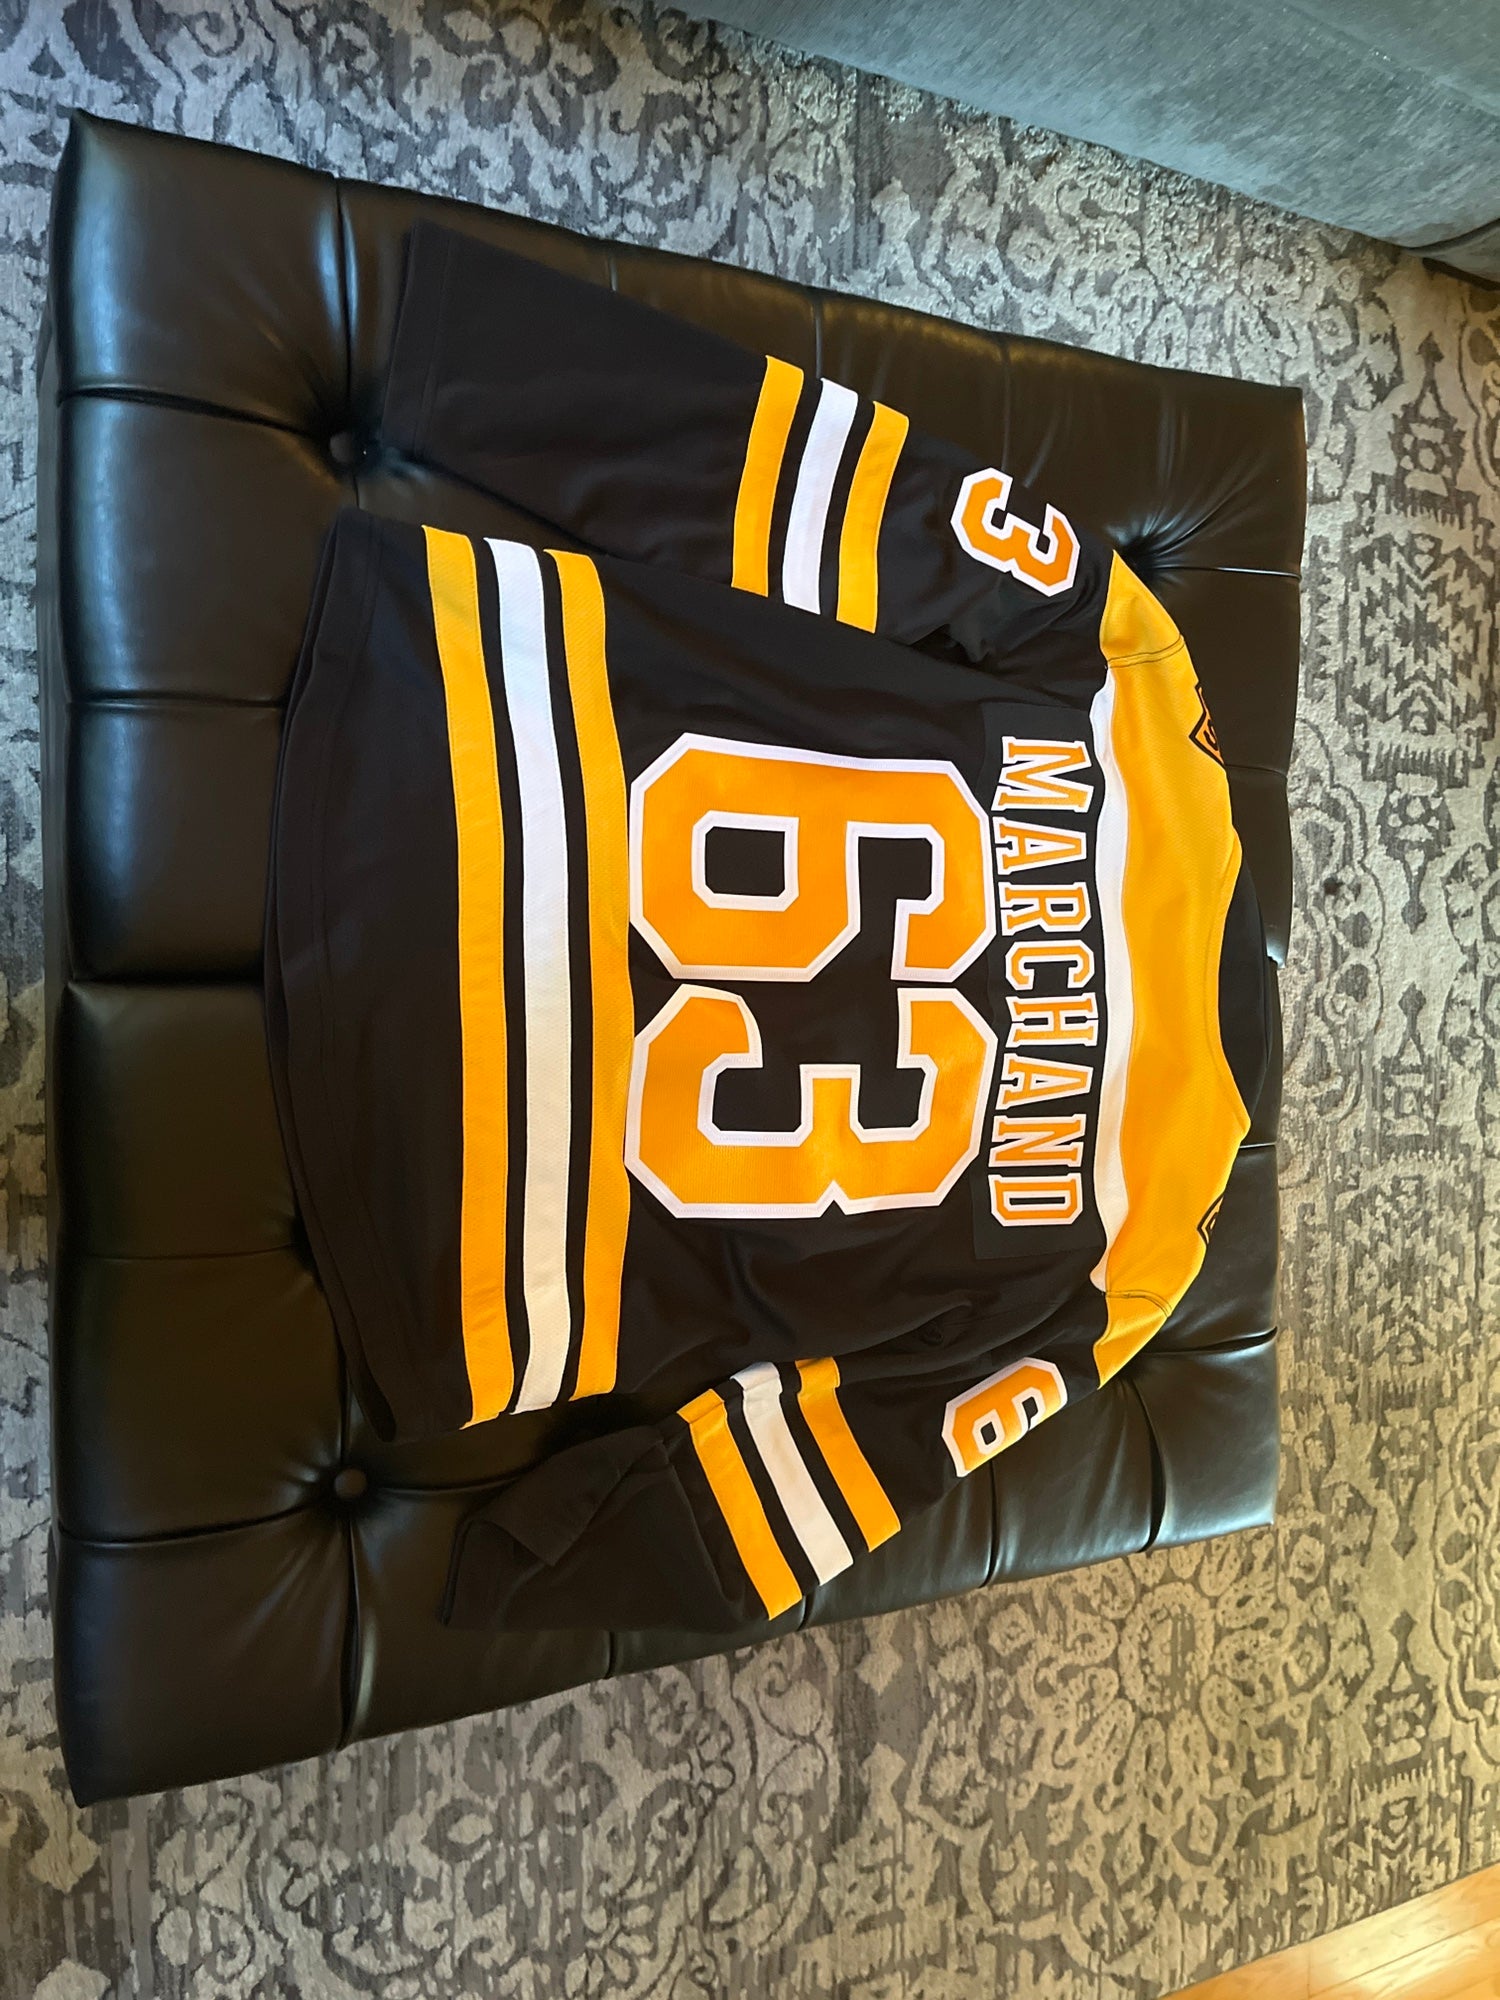 marchand jersey